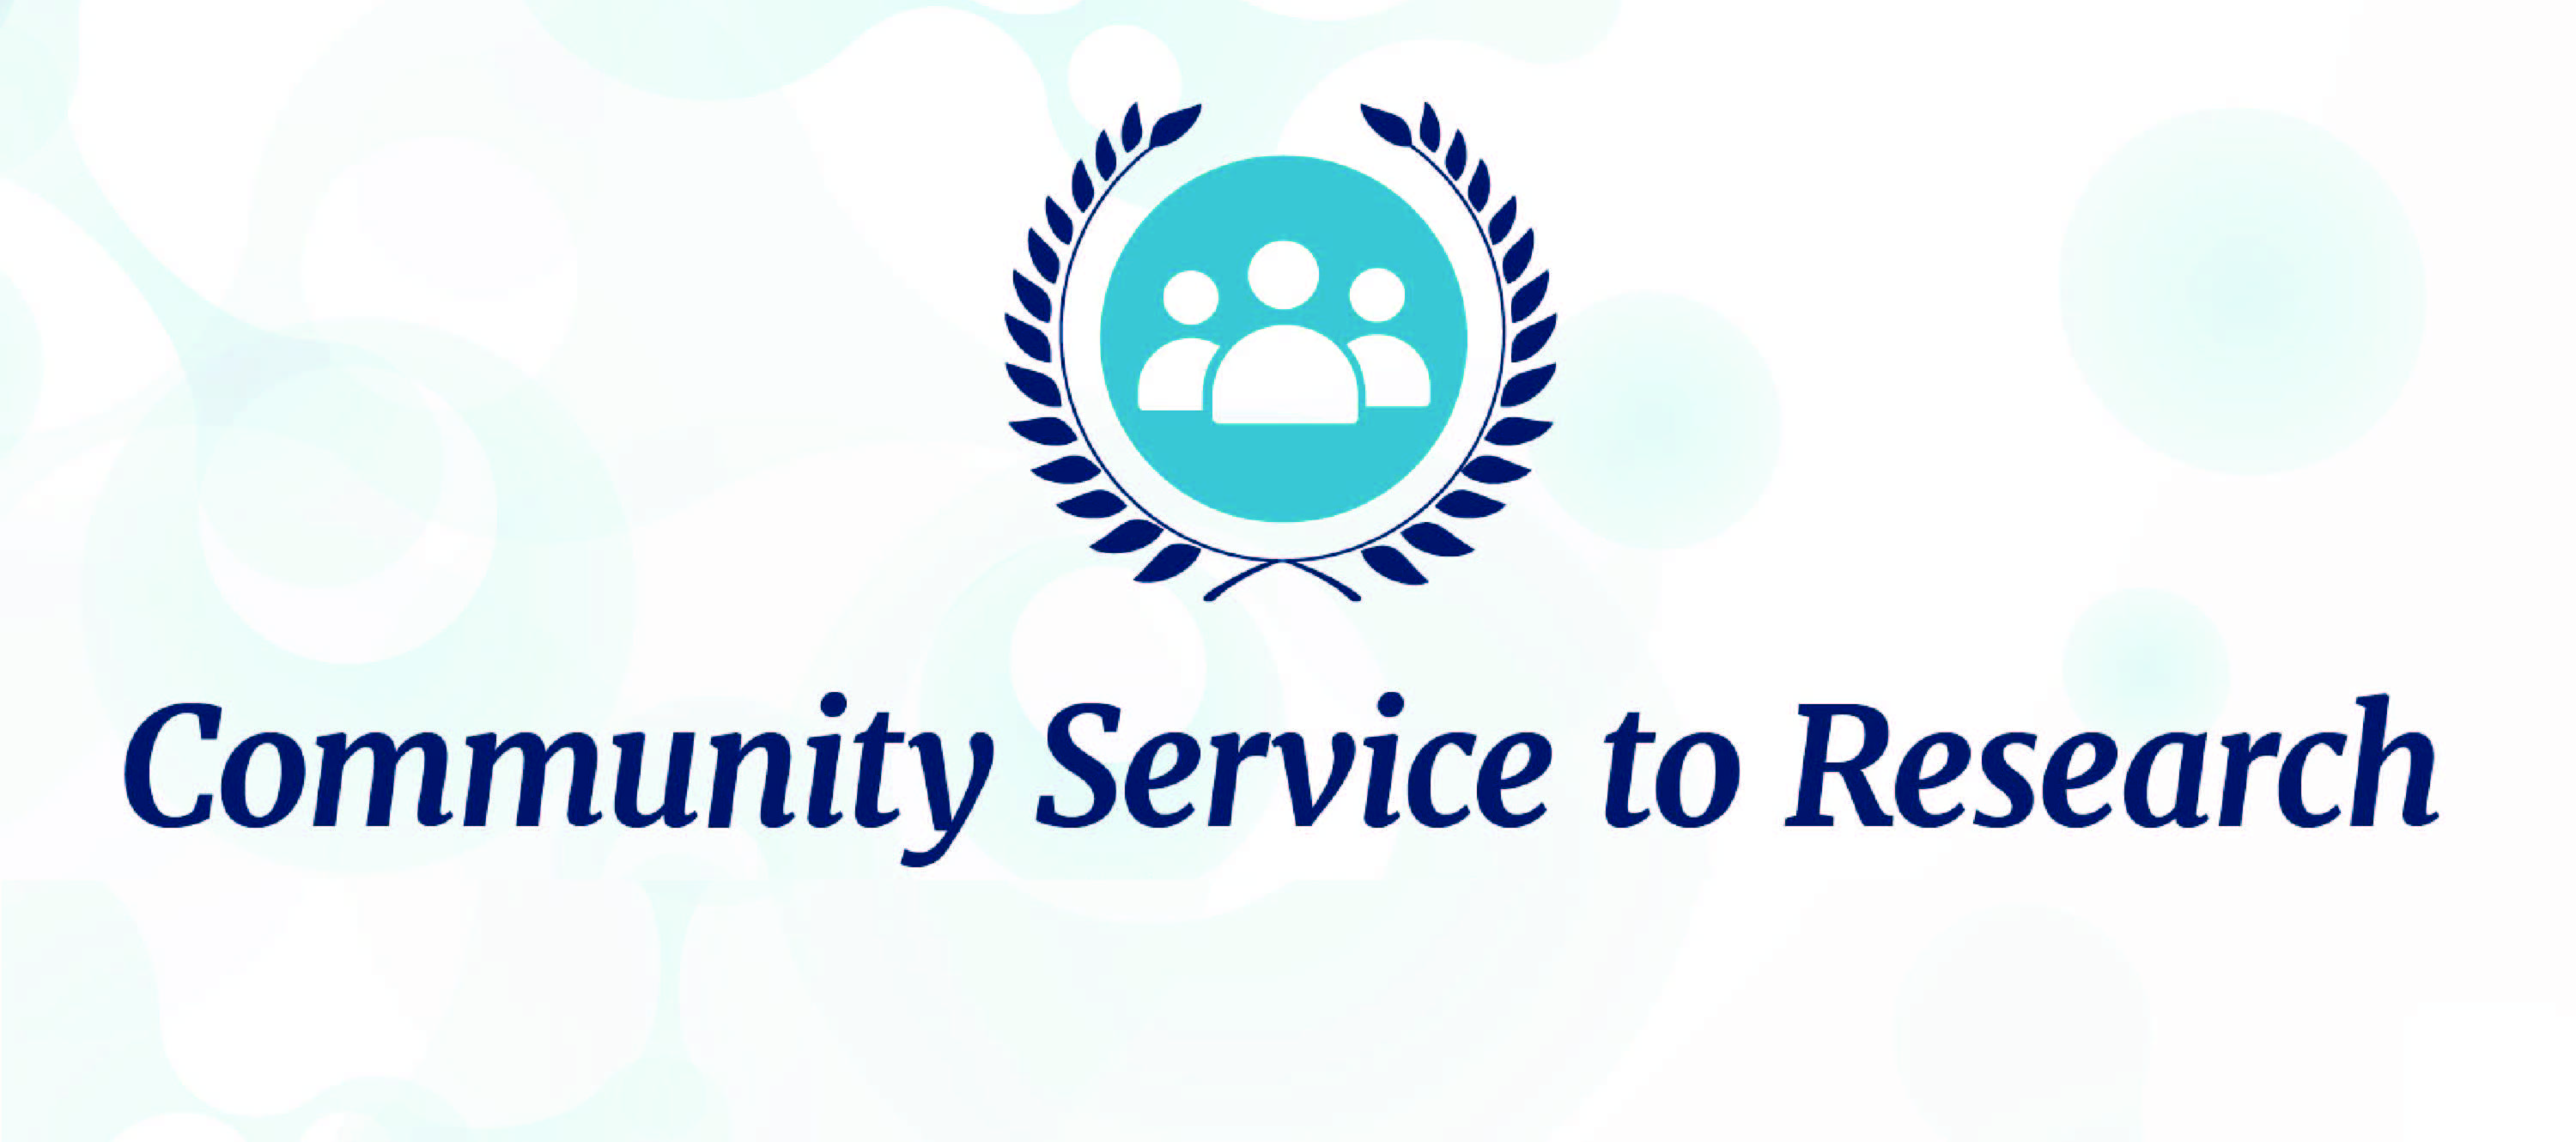 Nominations open for Community Service to Research Awards